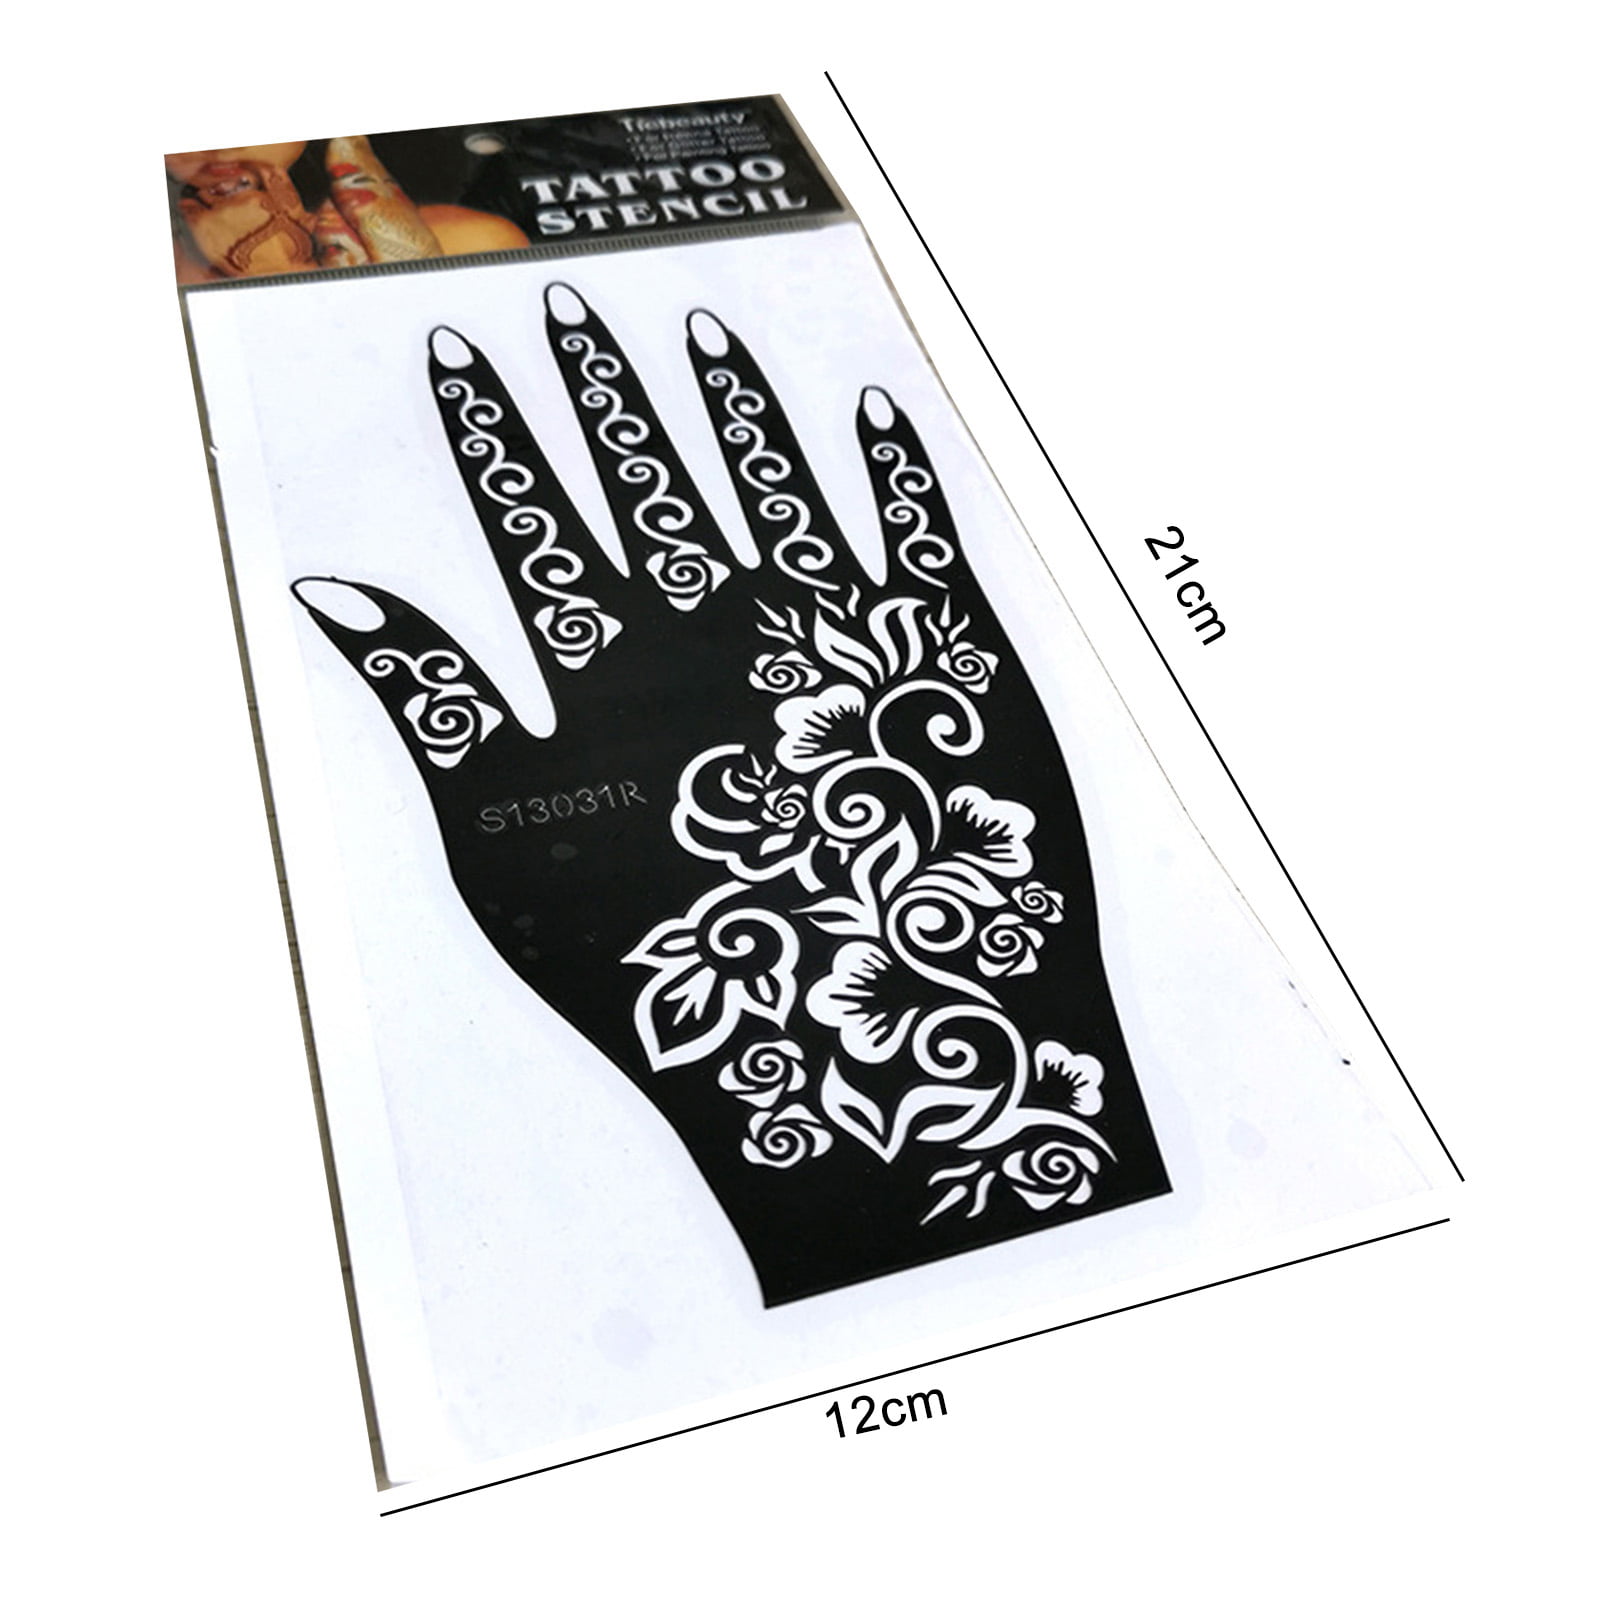 1PC Glitter Tattoo Stencil Drawing For Painting Airbrush Tattoo Stencils  For Tattoos Temporary Henna Templates Stickers #275072